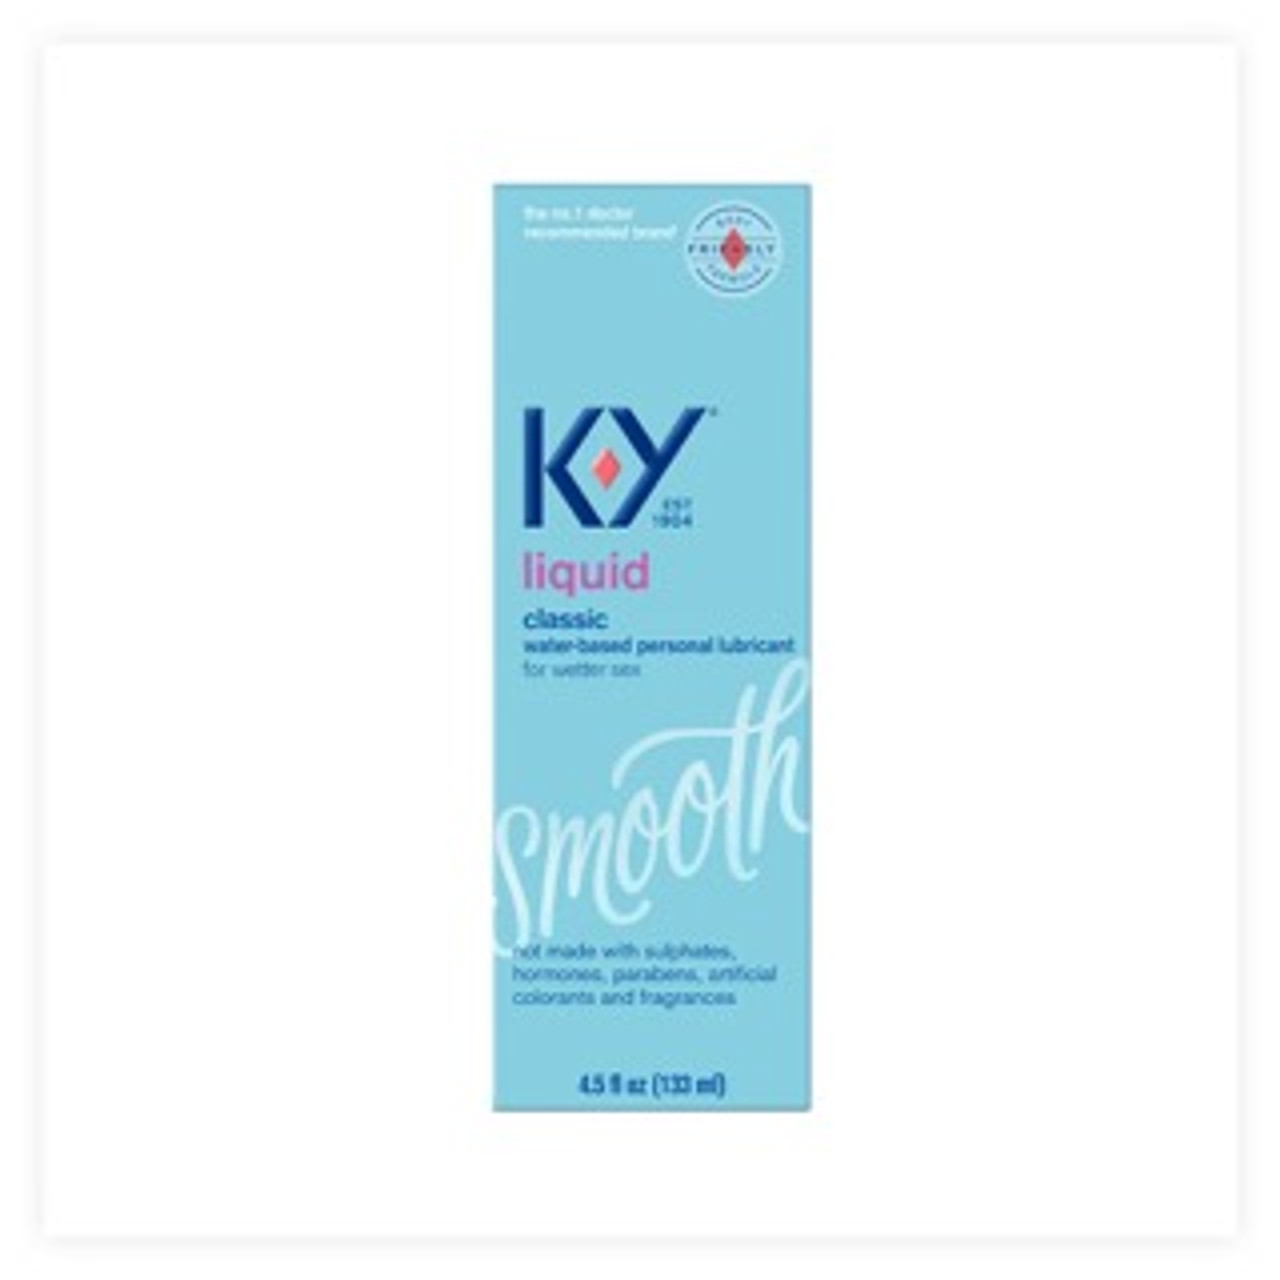 Buy KY Liquid Classic Water Based Lubricant Online | CondomsFast